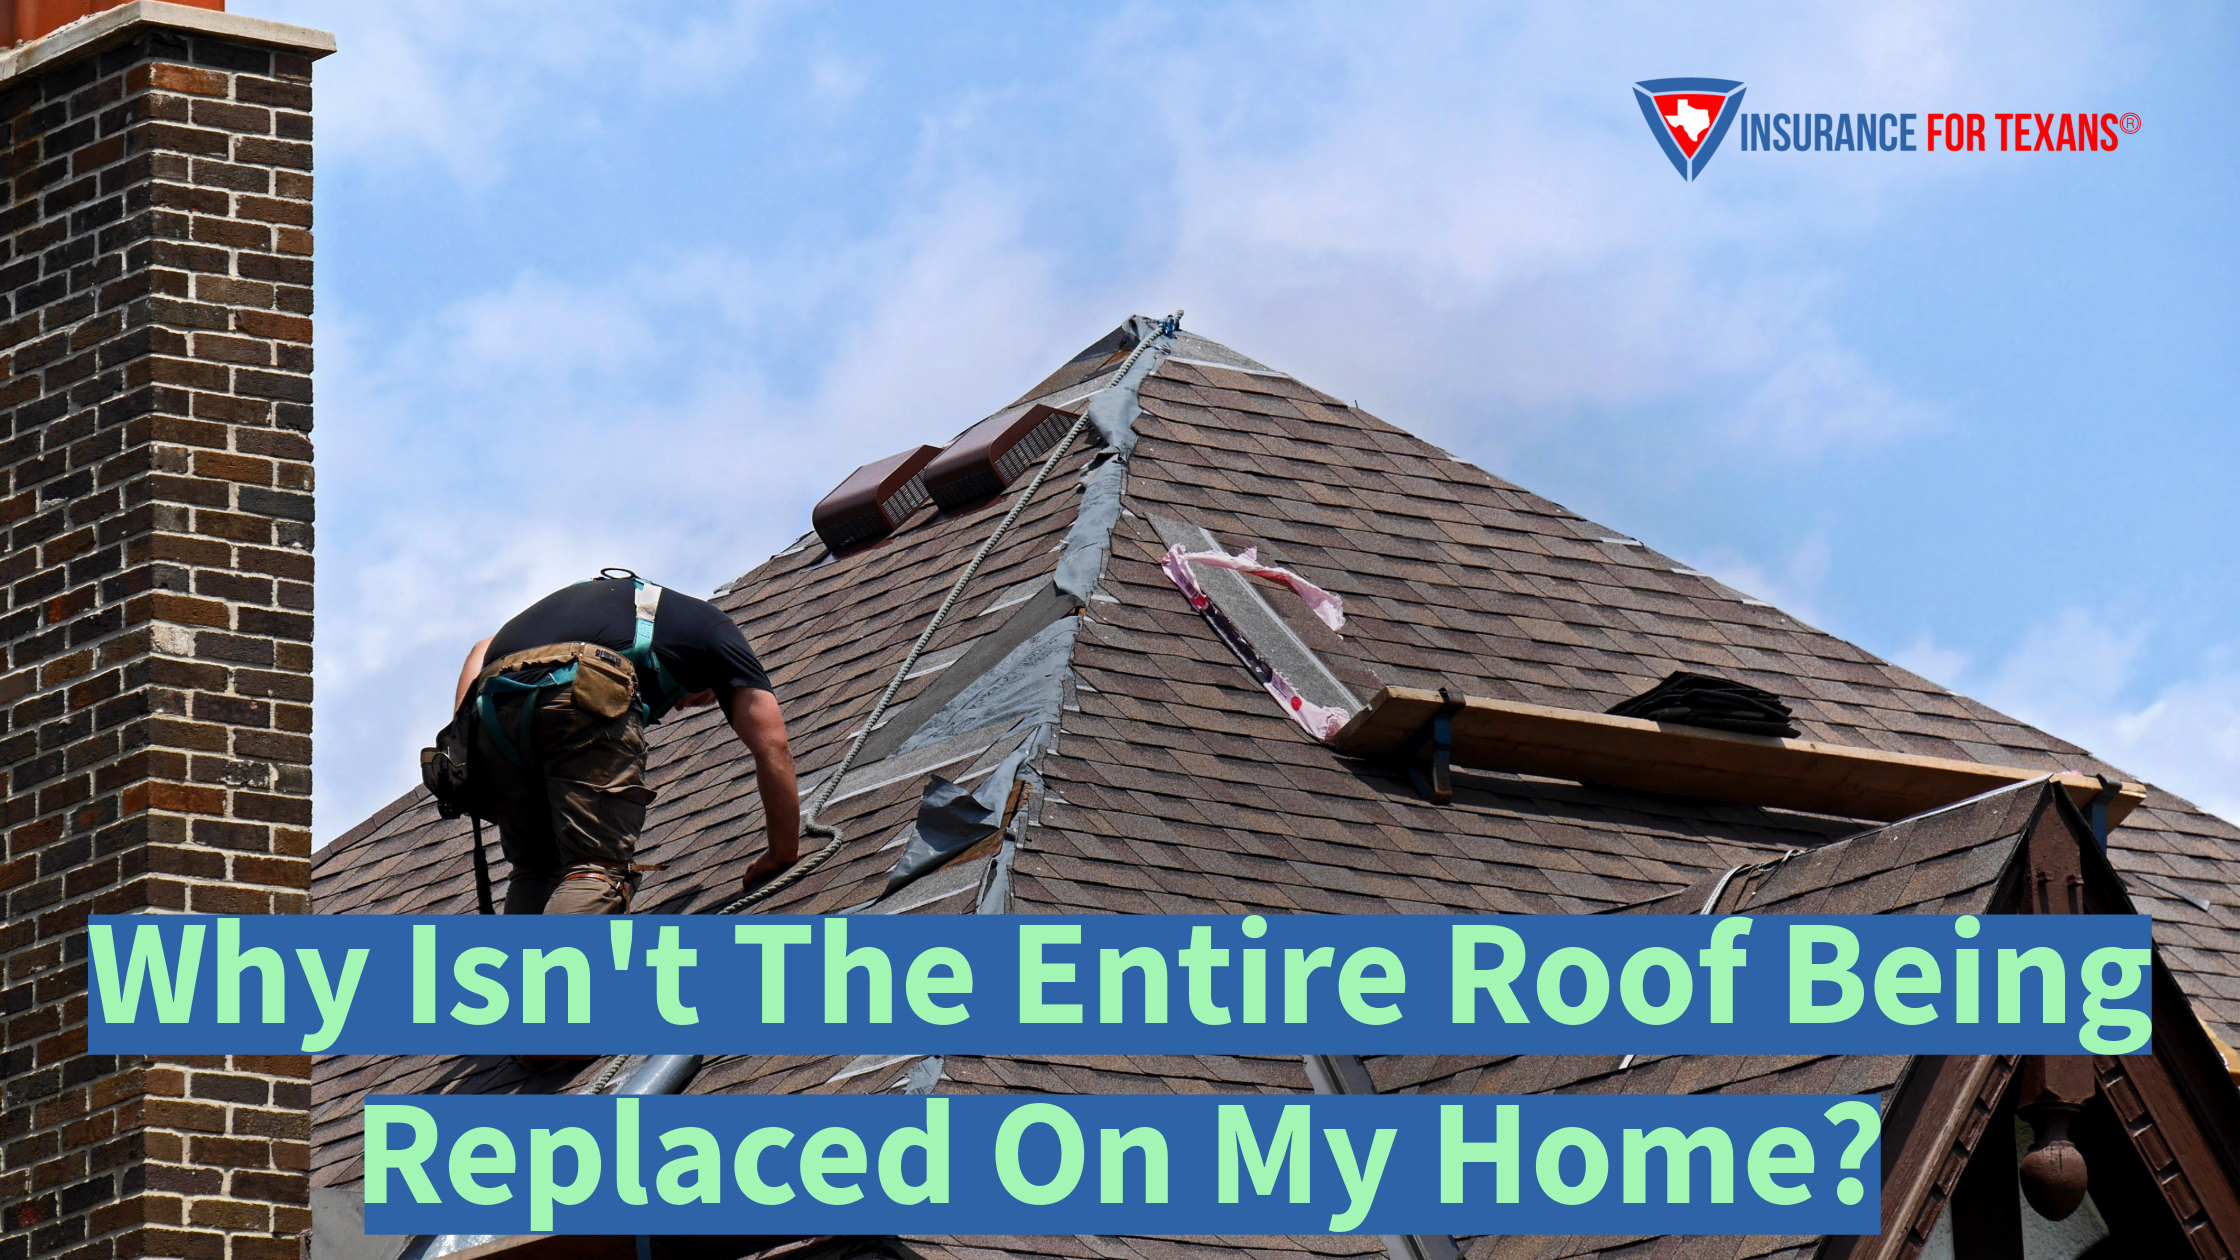 Why Isn't The Entire Roof Being Replaced On My Home?